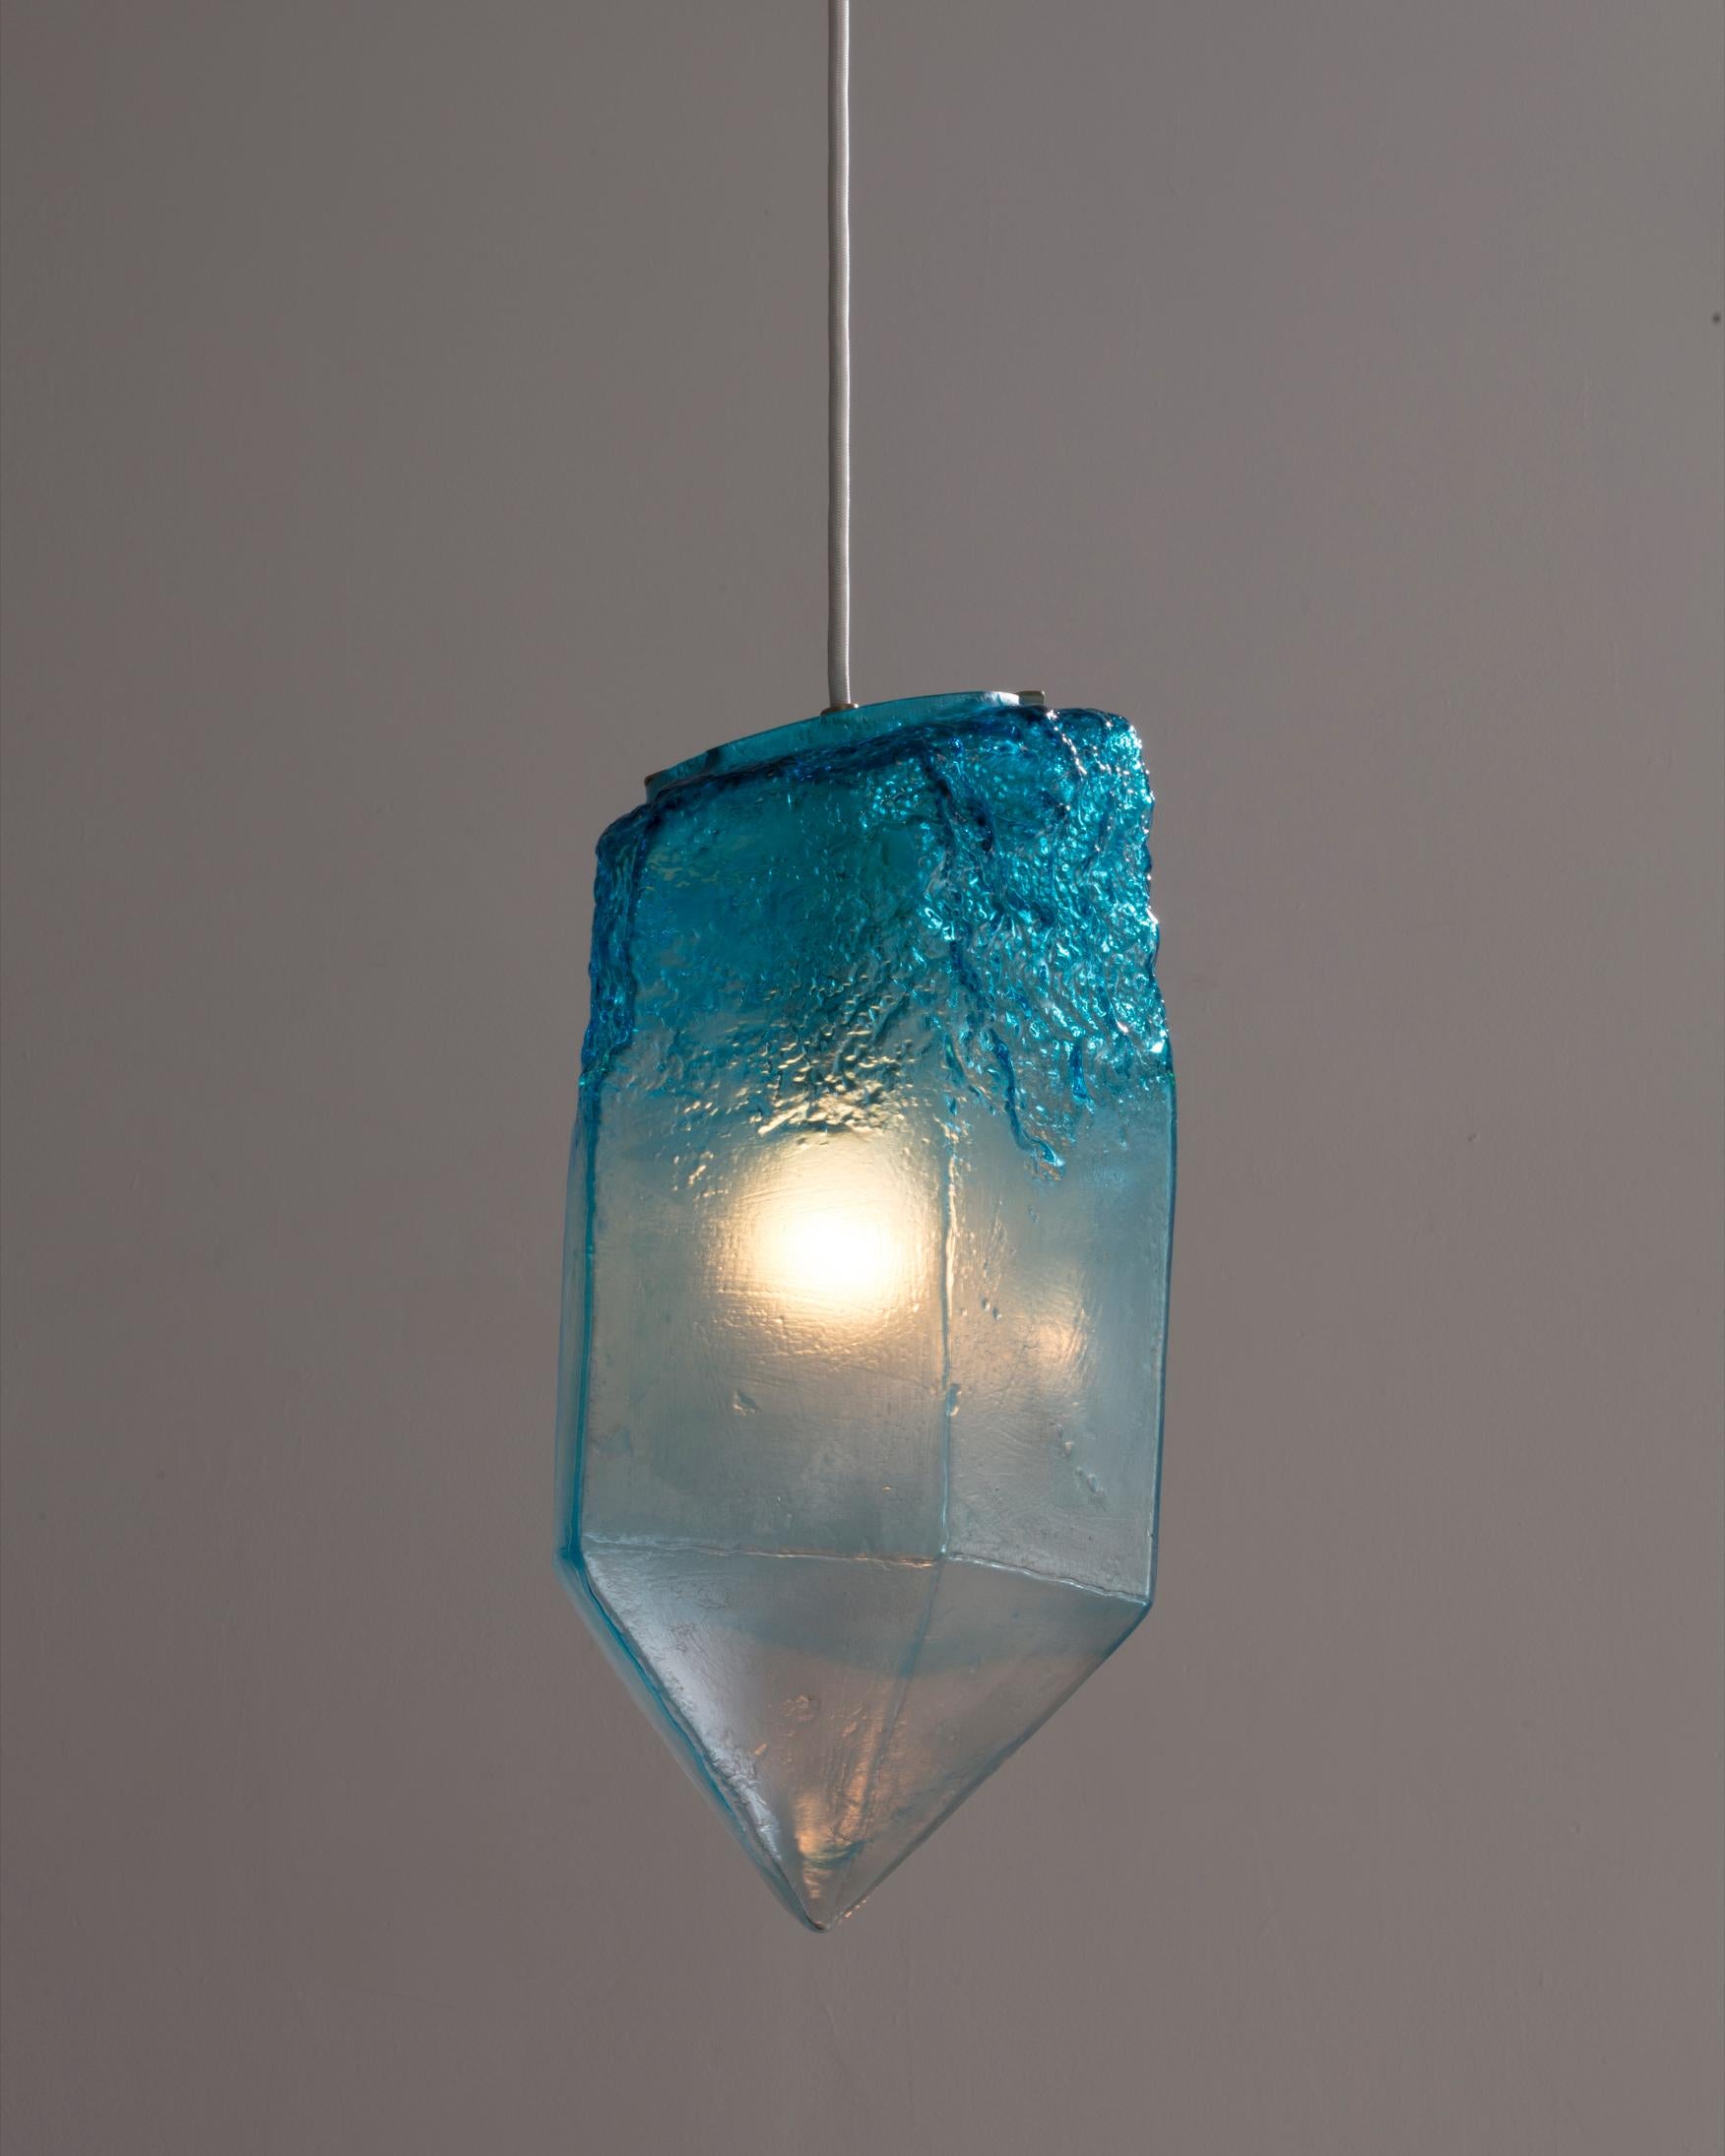 Modern Sculptural Pendant Light in Turquoise Glass by Jeff Zimmerman, 2016